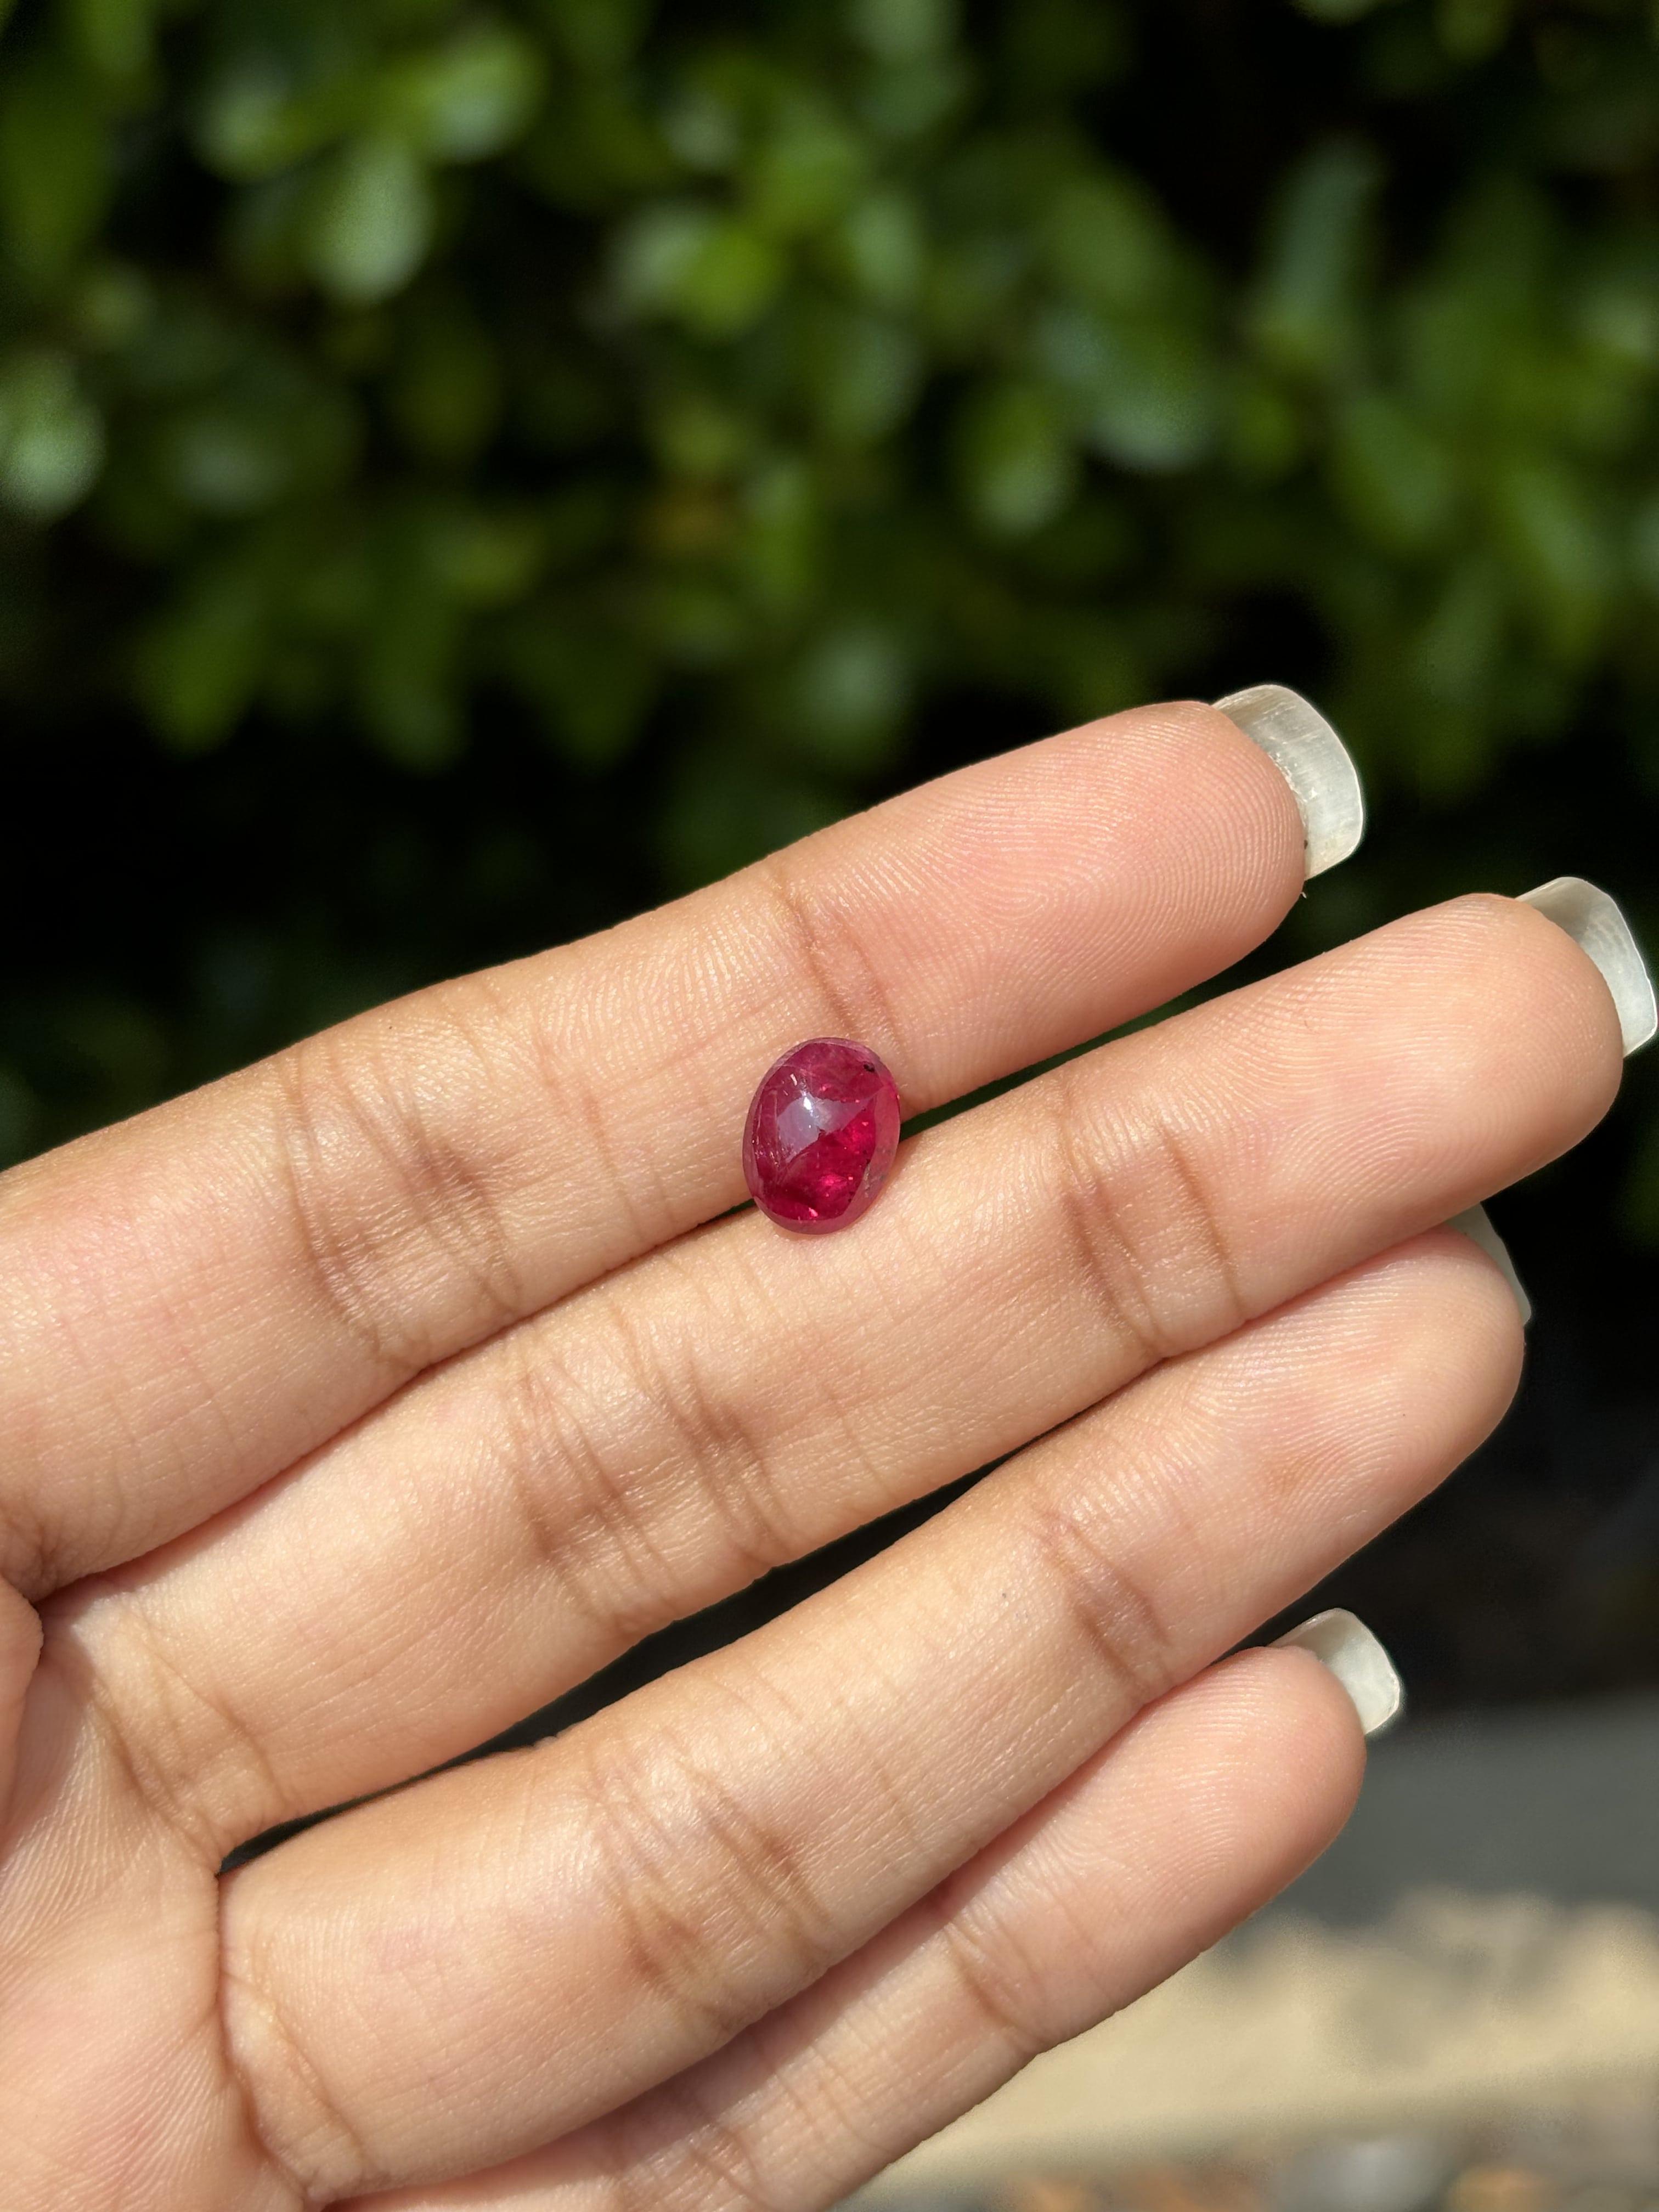 A gorgeous 1.79 Carat Ruby gemstone. It is completely natural and of good quality. The ruby has a symmetrical and flattering, sugarloaf shape and its color is a deep, pigeon blood red hue that is absolutely stunning.

Rubies are known to signify